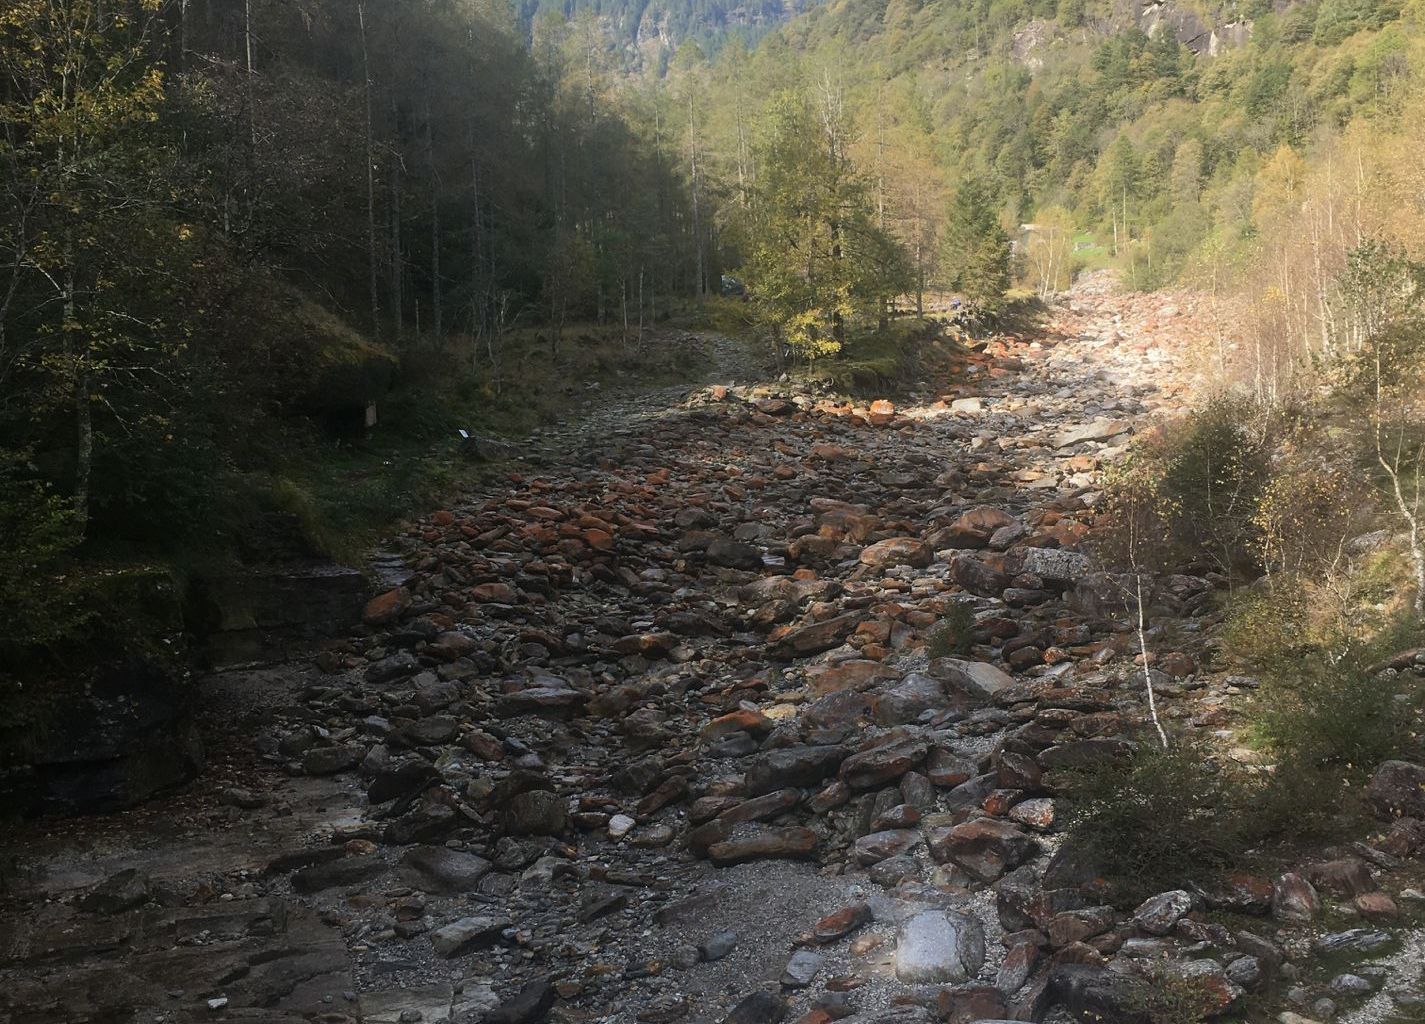 Due to the subsidised use of hydroelectric power, water is now being diverted from many mountain streams for power stations. This impairs the passability of water courses and disturbs the flow dynamics. As a result, biodiversity is reduced.